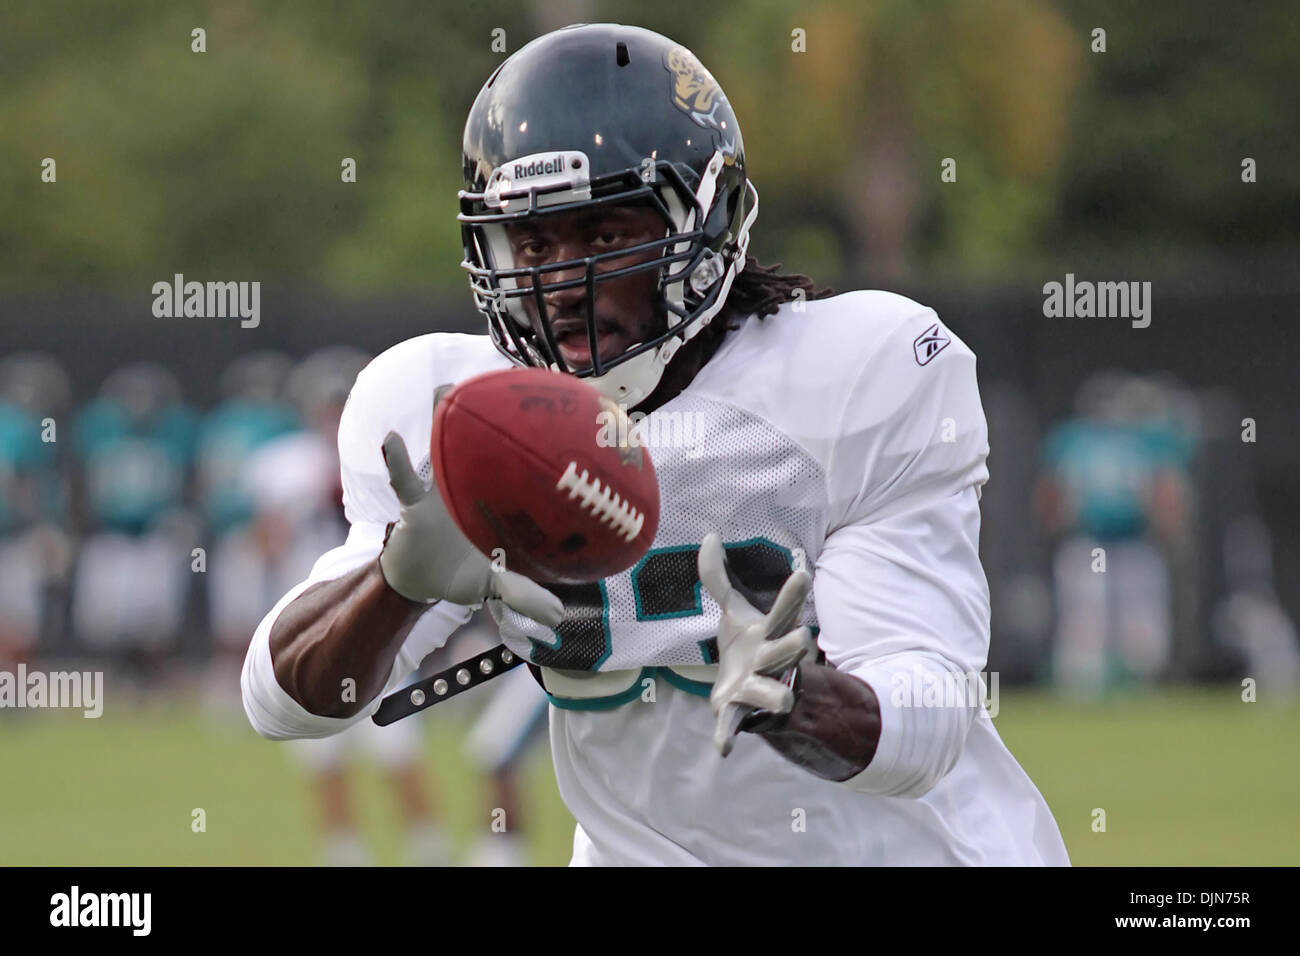 Greg Jones catches a pass during a drill at the Jacksonville Jaguars  training camp held at the Jaguars practice fields in Jacksonville, FL.  (Credit Image: © David Roseblum/Southcreek Global/ZUMApress.com Stock Photo  